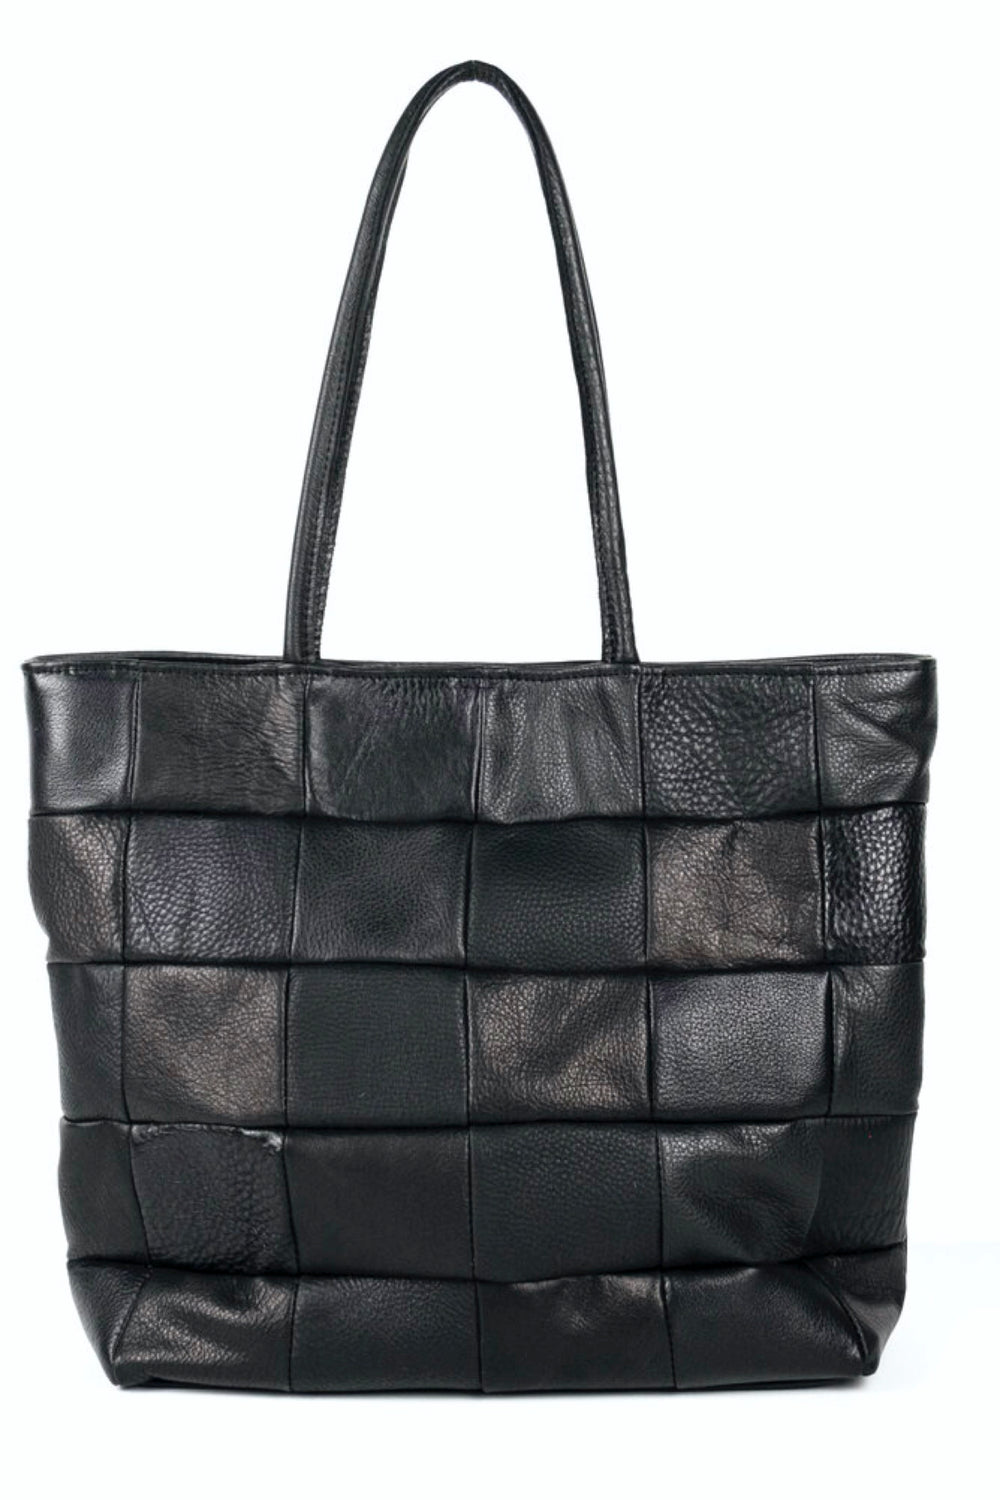 Black Checkered Patchwork Tote